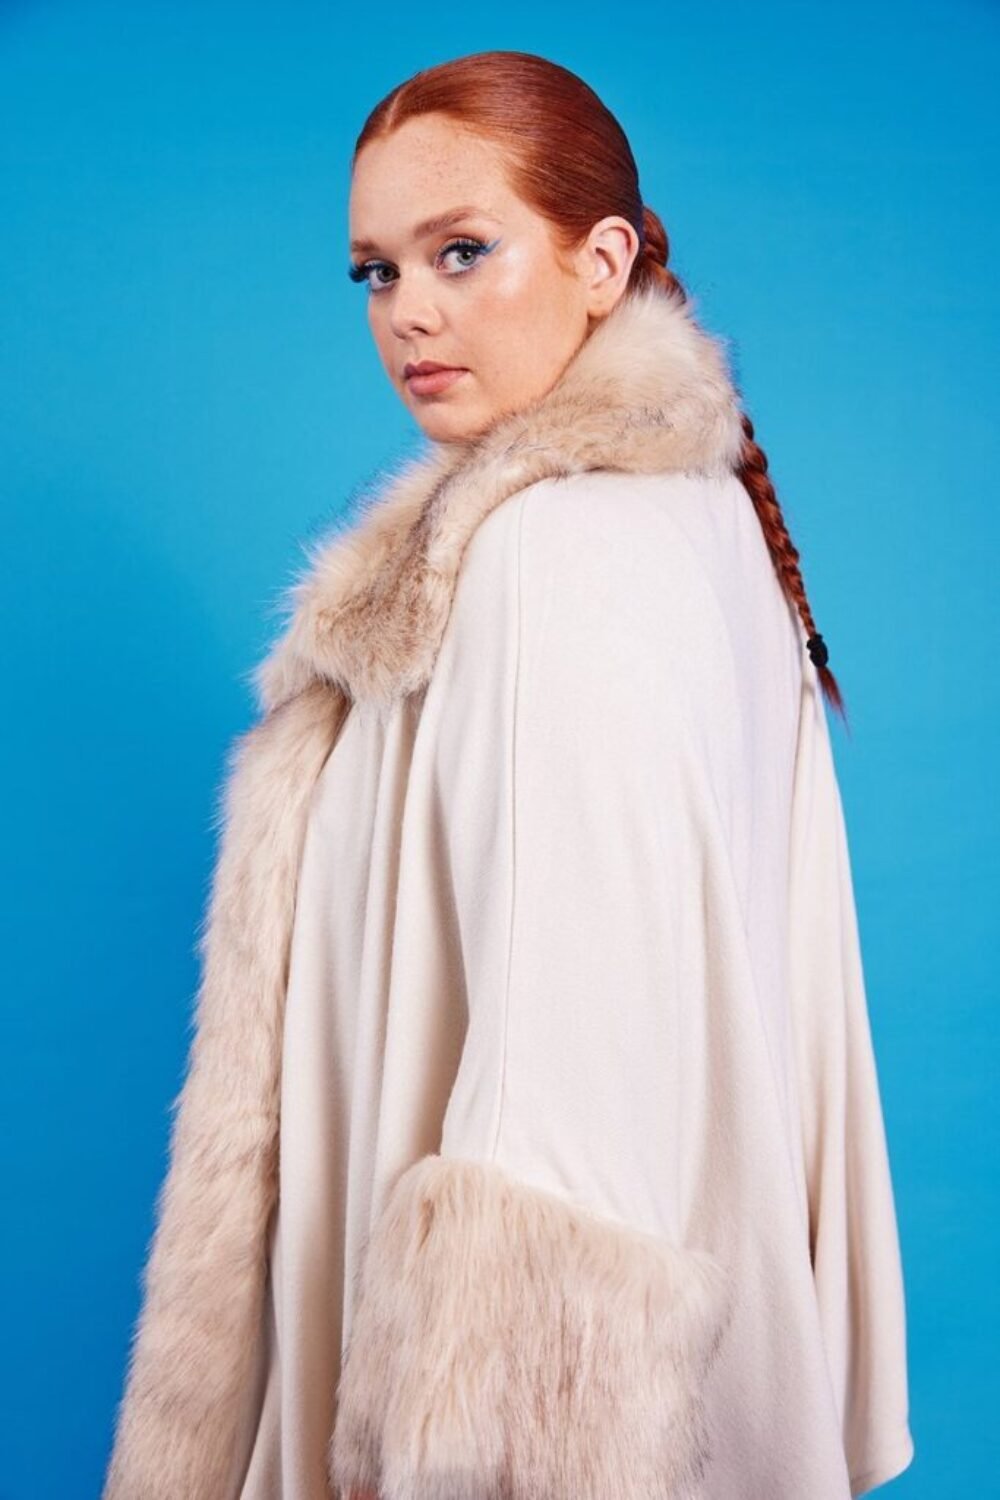 Shop Lux White Luxury Faux Fur Fine Knitted Coat and women's luxury and designer clothes at www.lux-apparel.co.uk